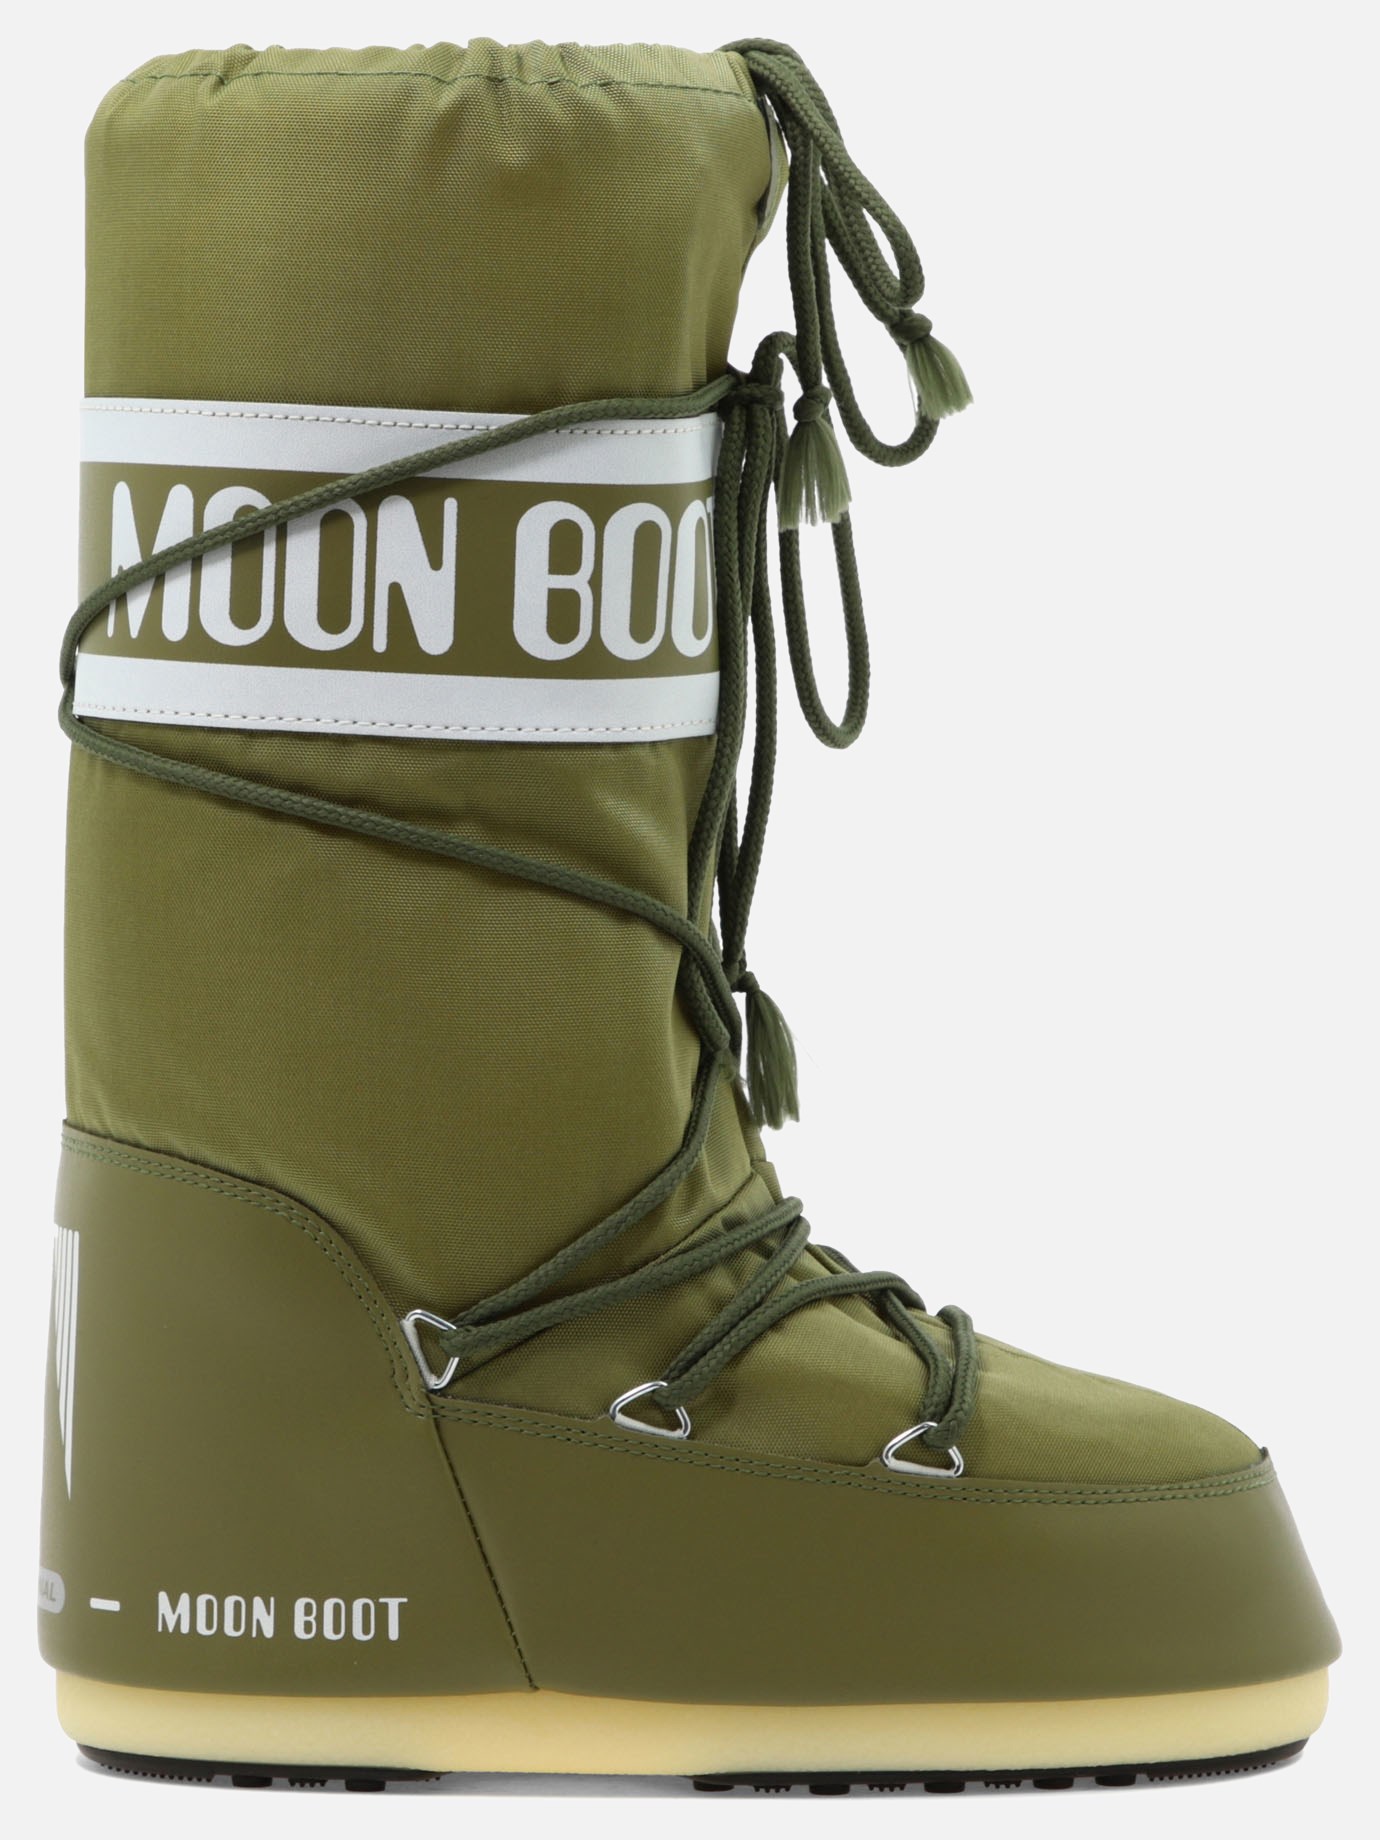  Icon Nylon  after-ski bootsby Moon Boot - 3